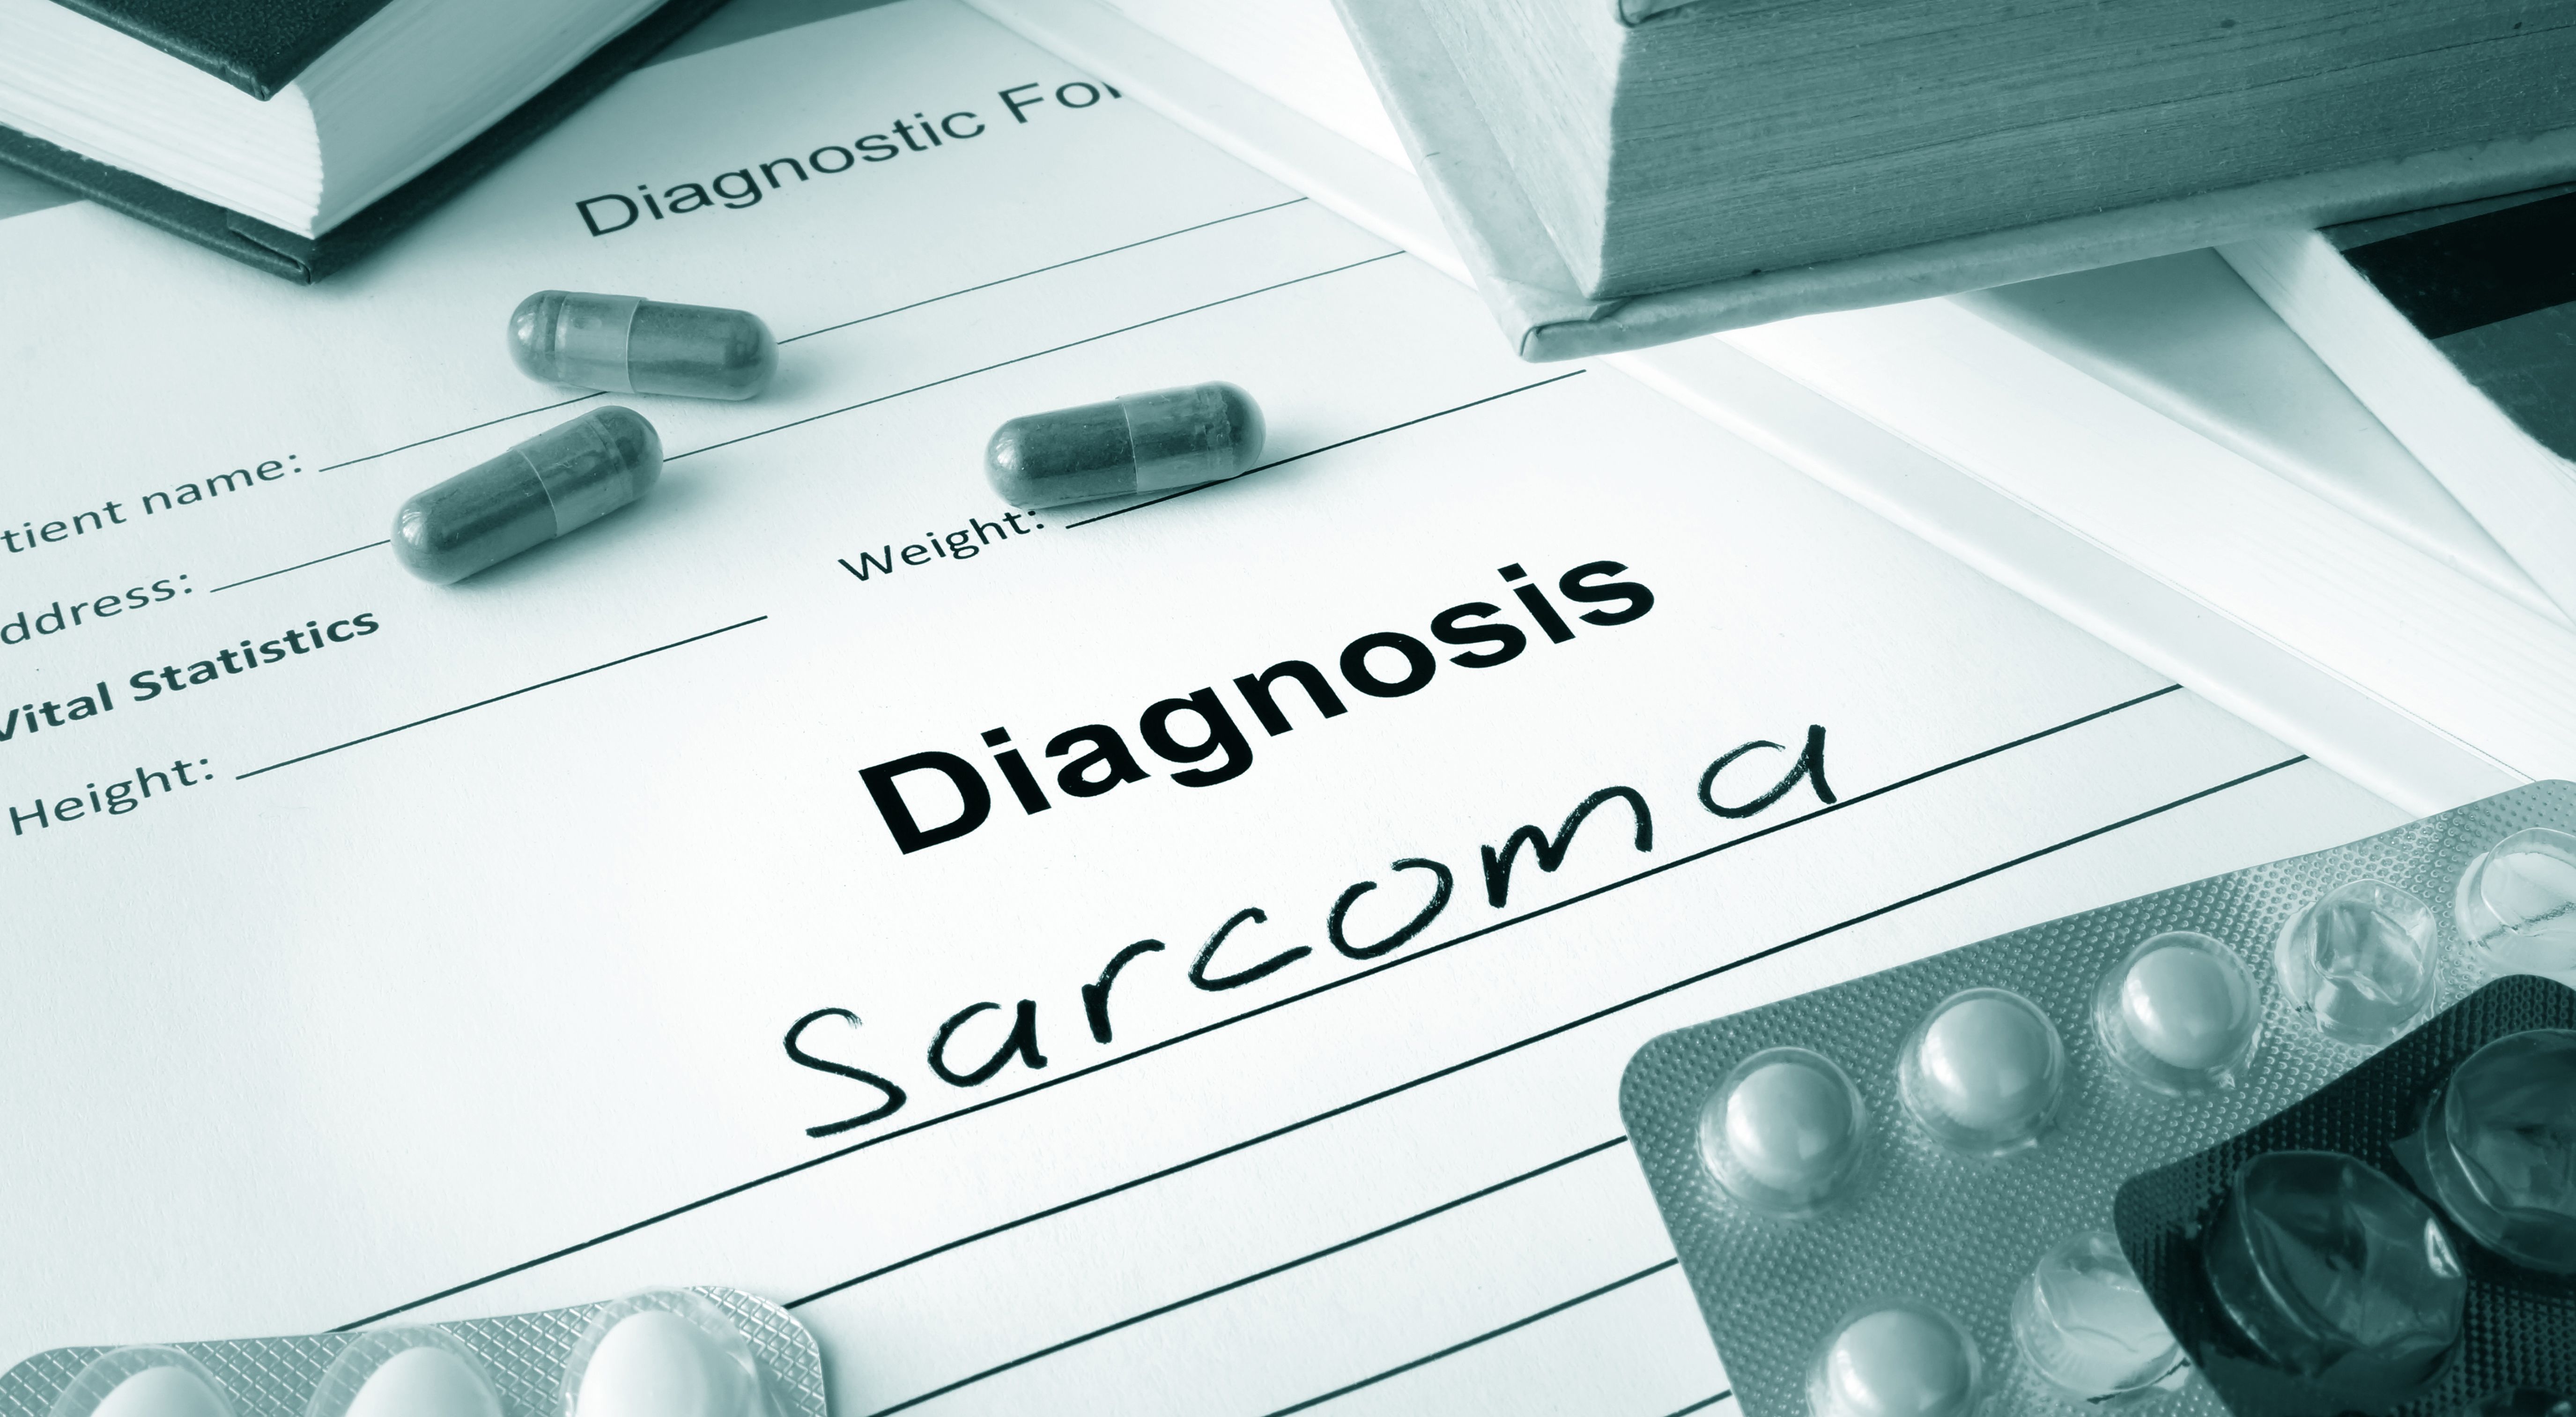 Better Diagnosing Is Needed in Sarcoma